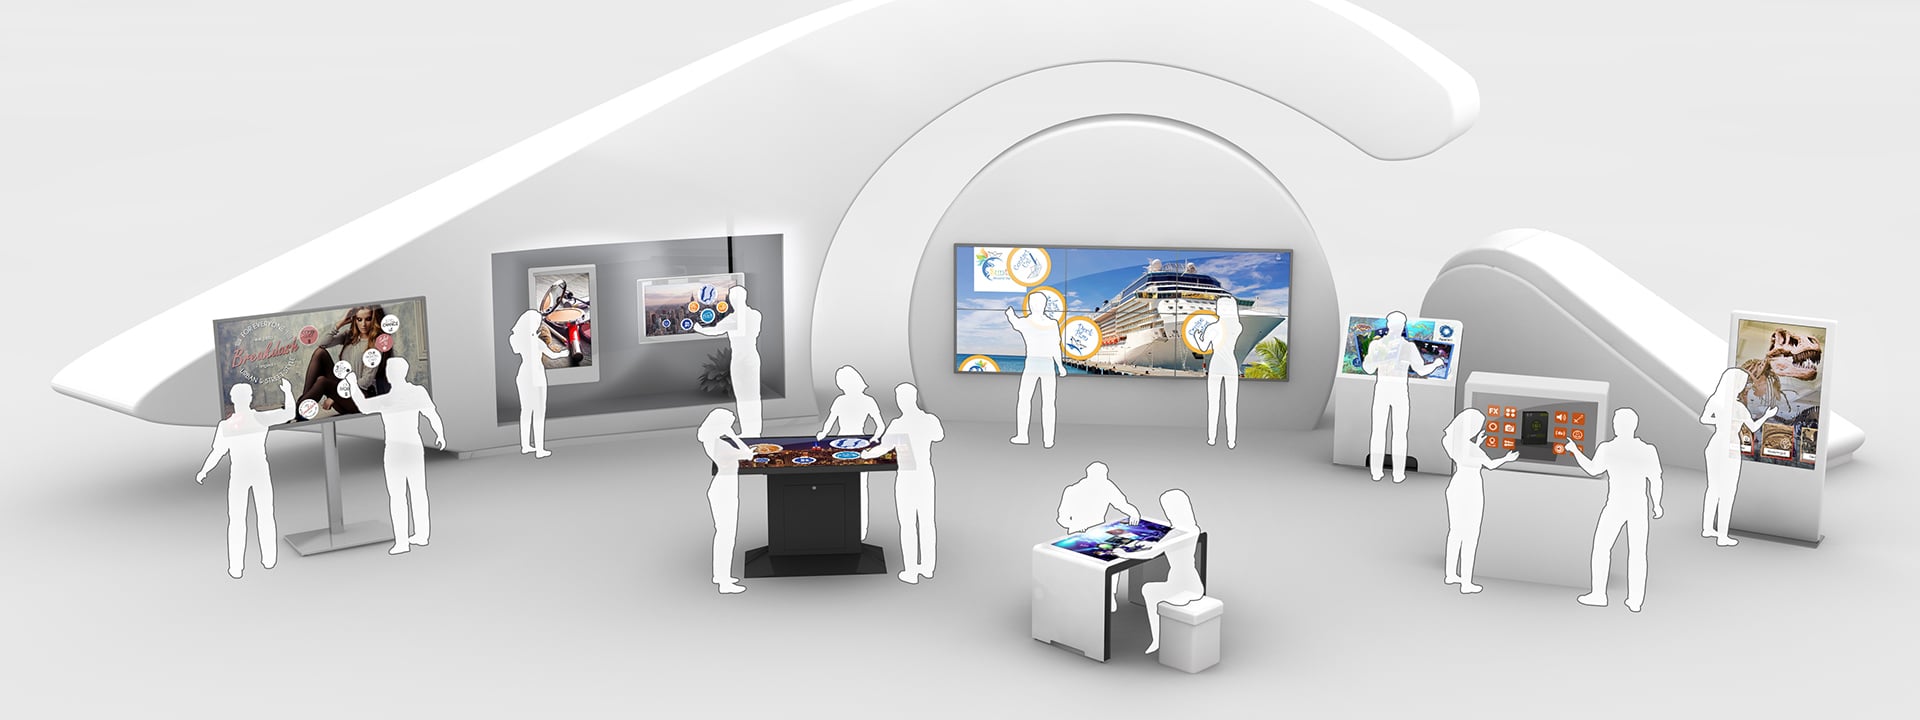 Multi touch screen software for Cruise Ships & Travel